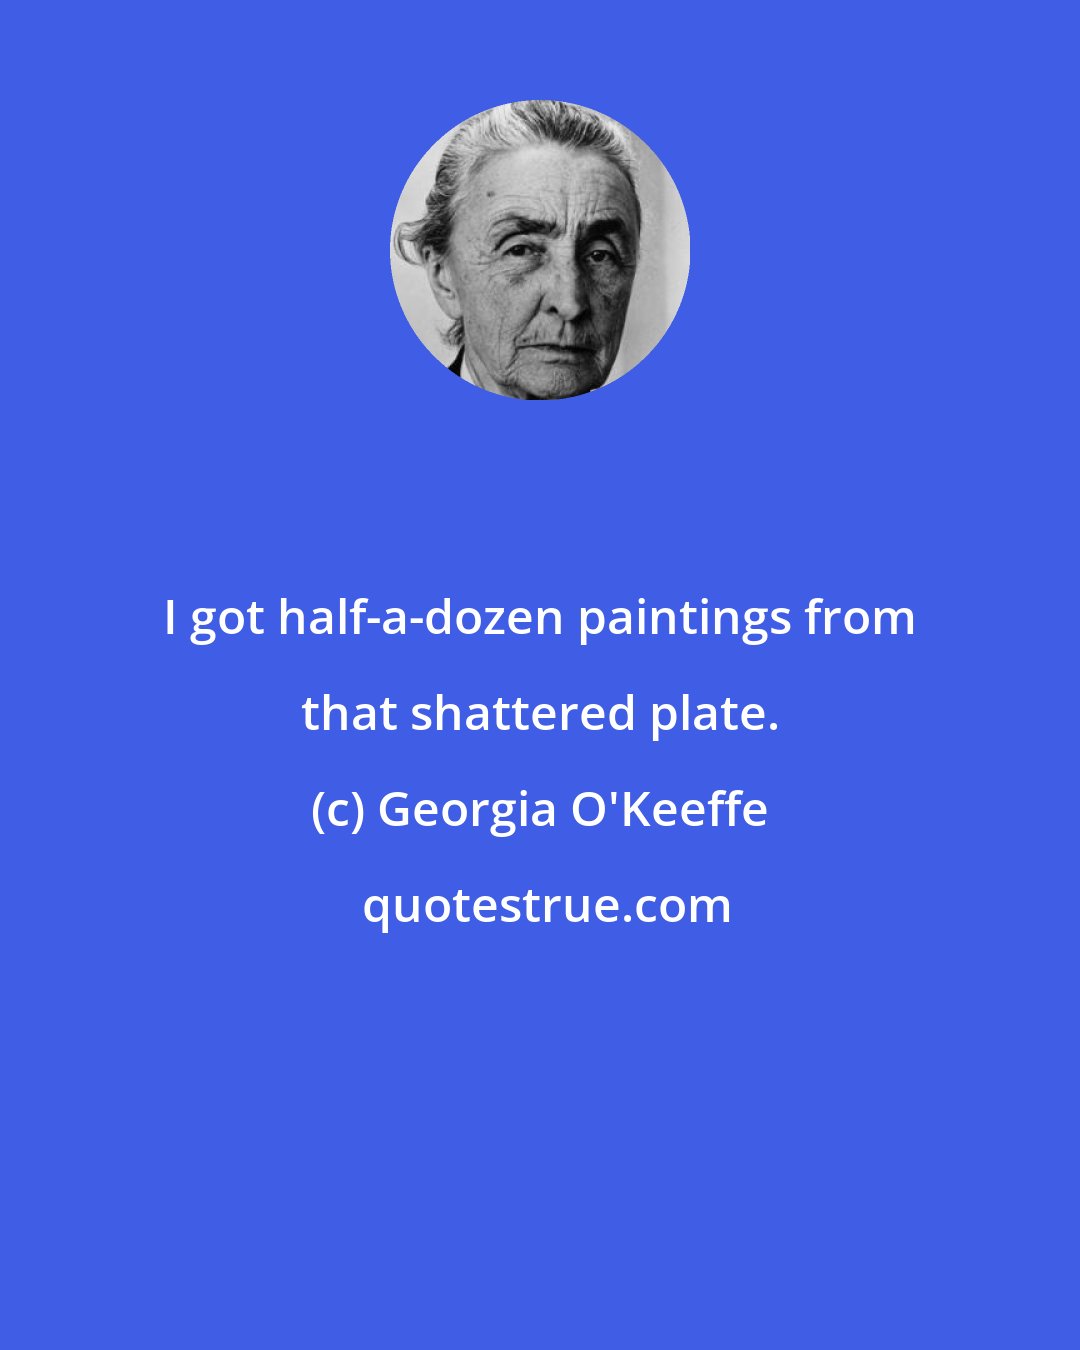 Georgia O'Keeffe: I got half-a-dozen paintings from that shattered plate.